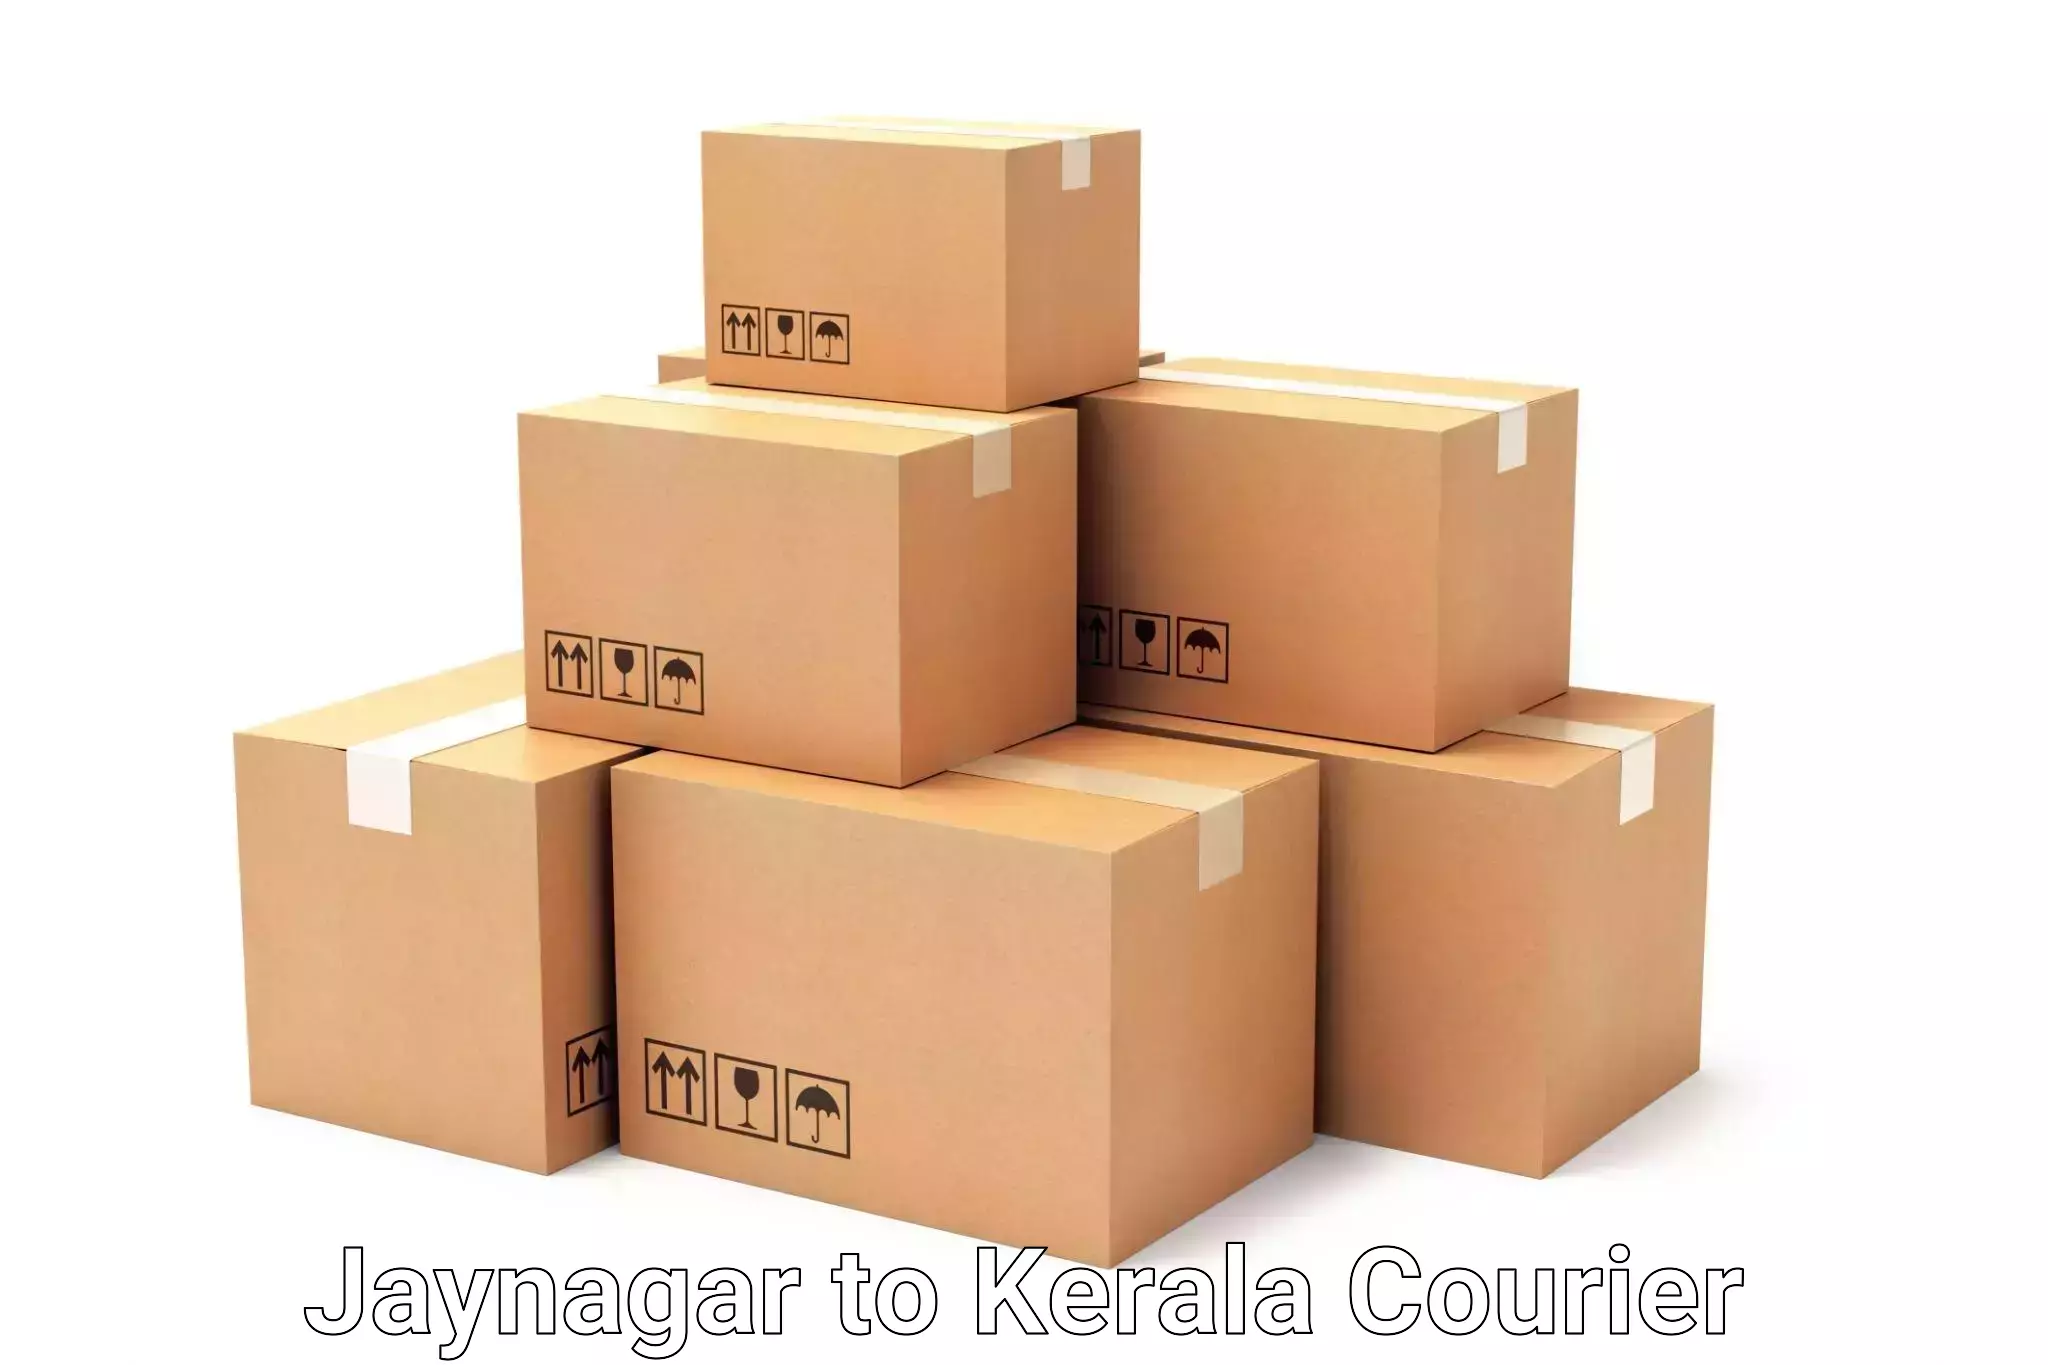 Luggage delivery providers Jaynagar to Kerala